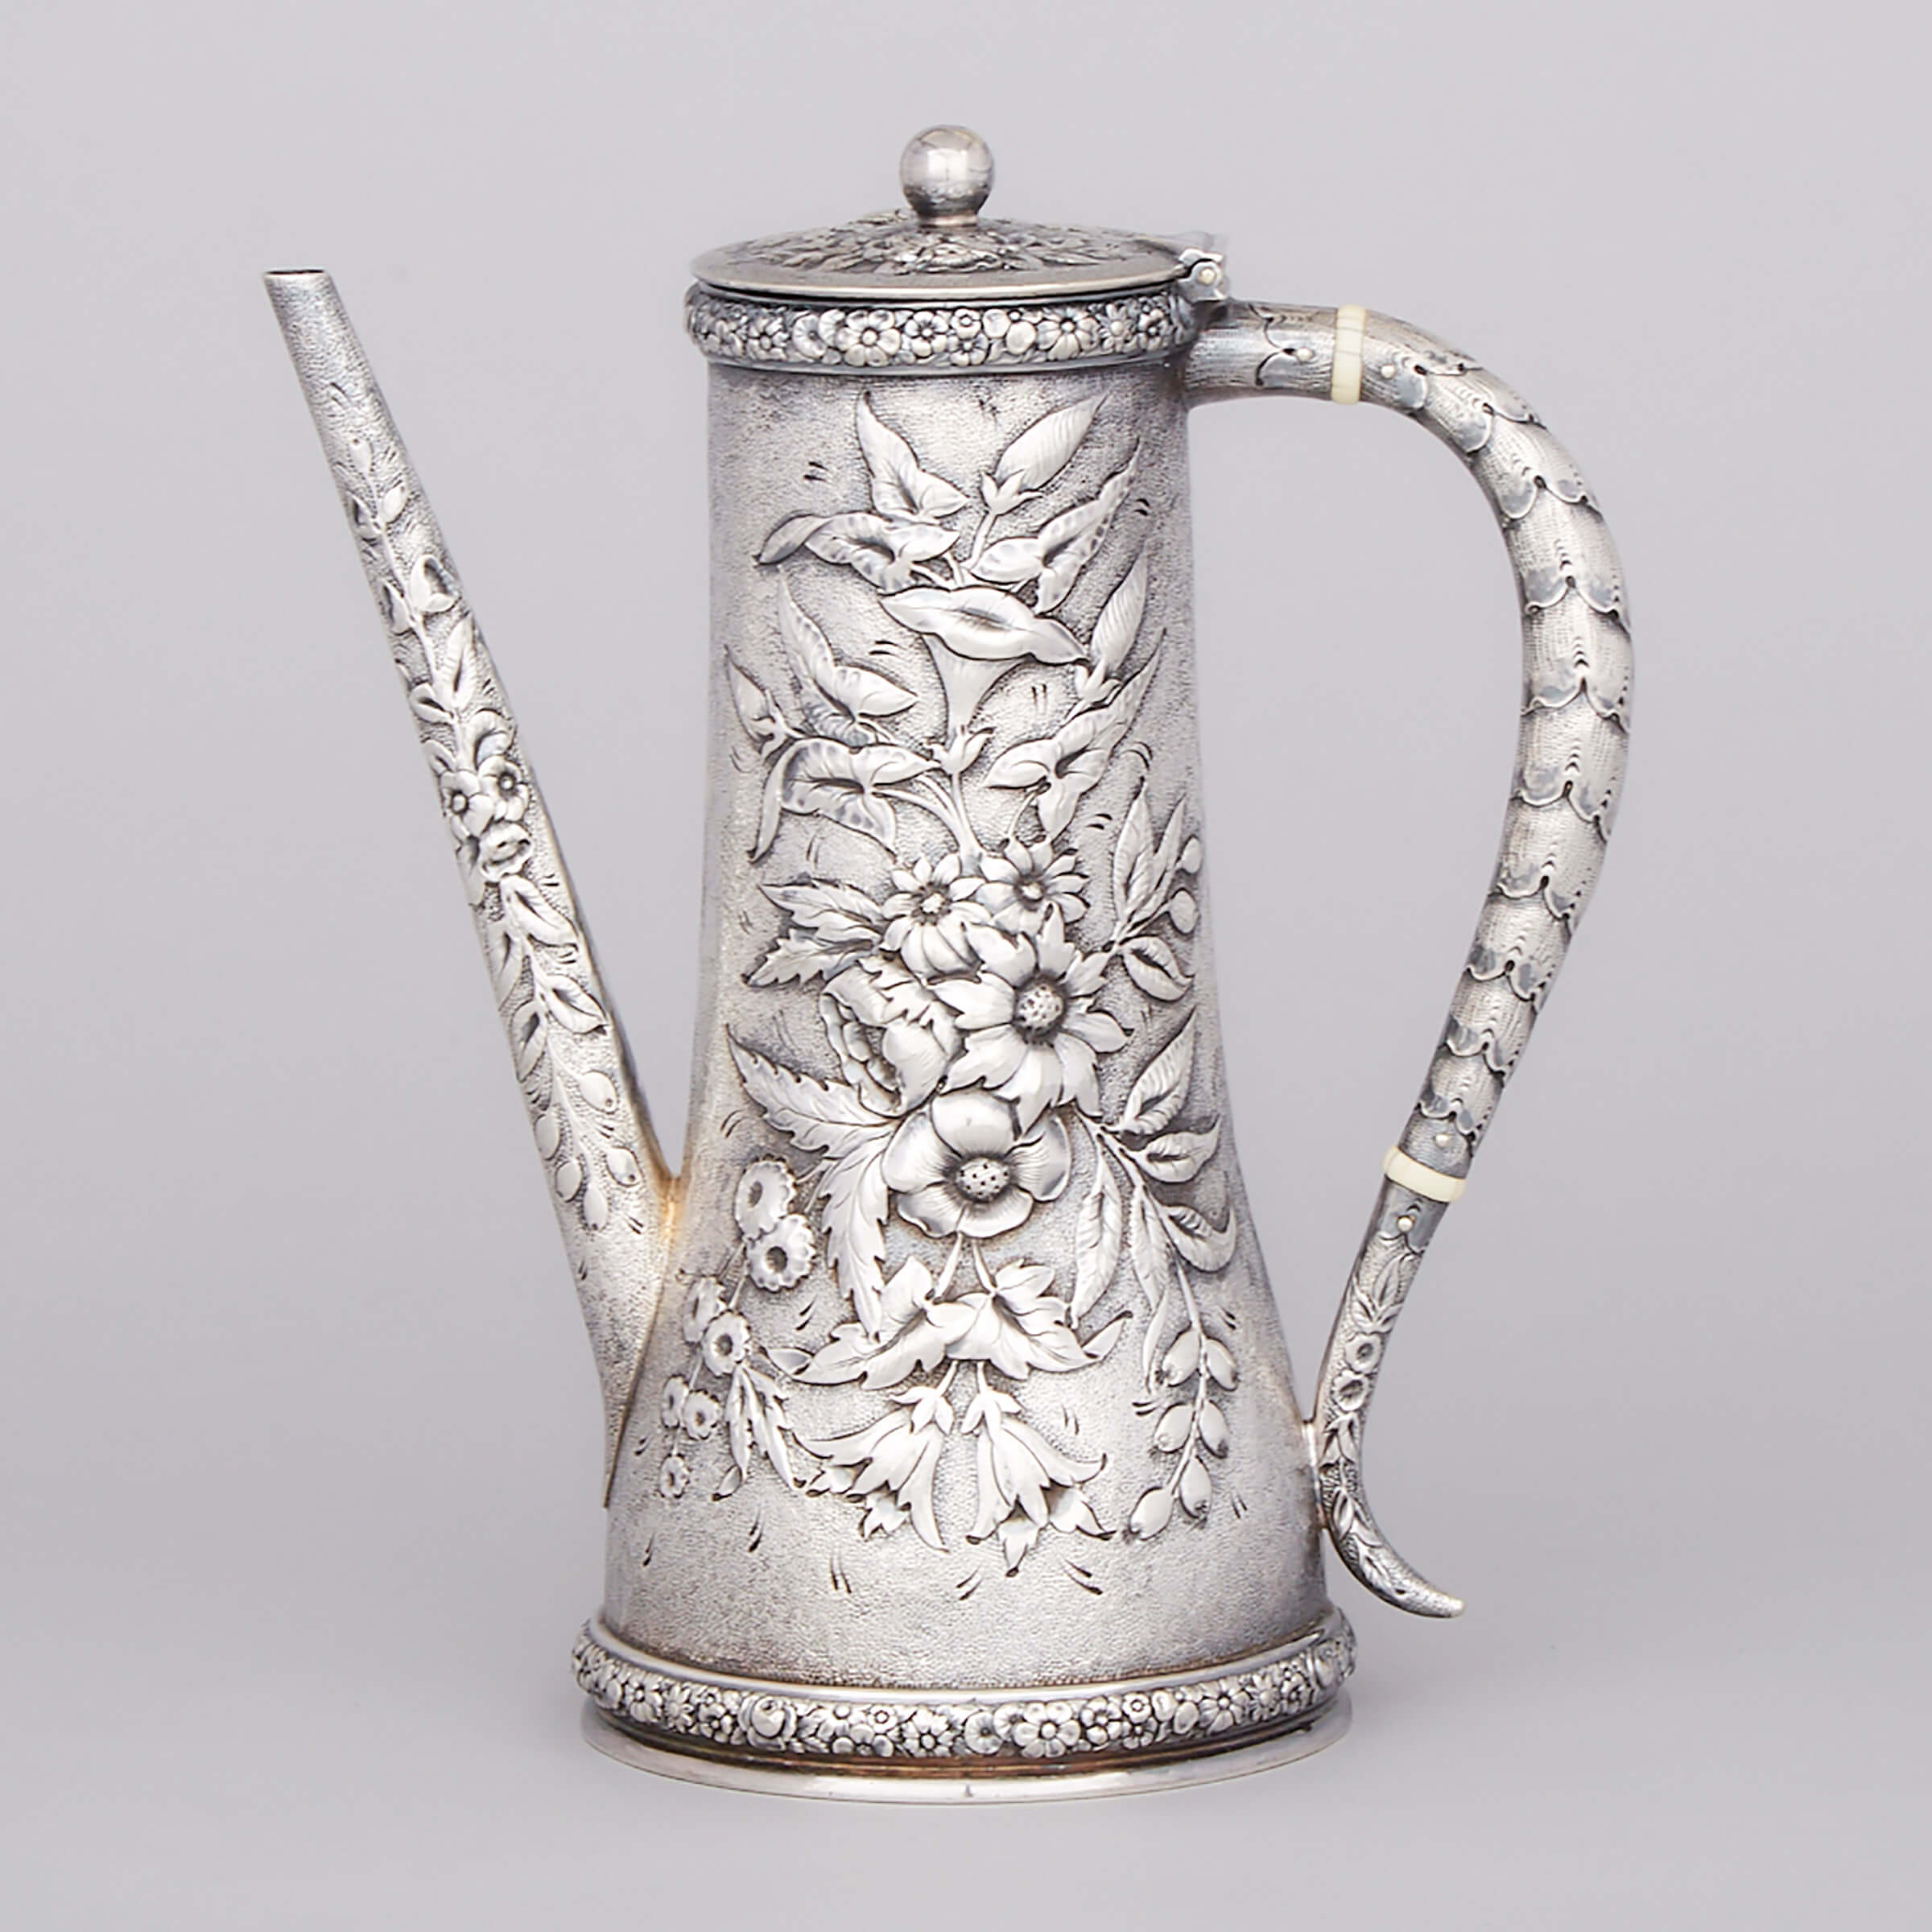 American Silver Plated Coffee Pot, Tiffany & Co., late 19th century